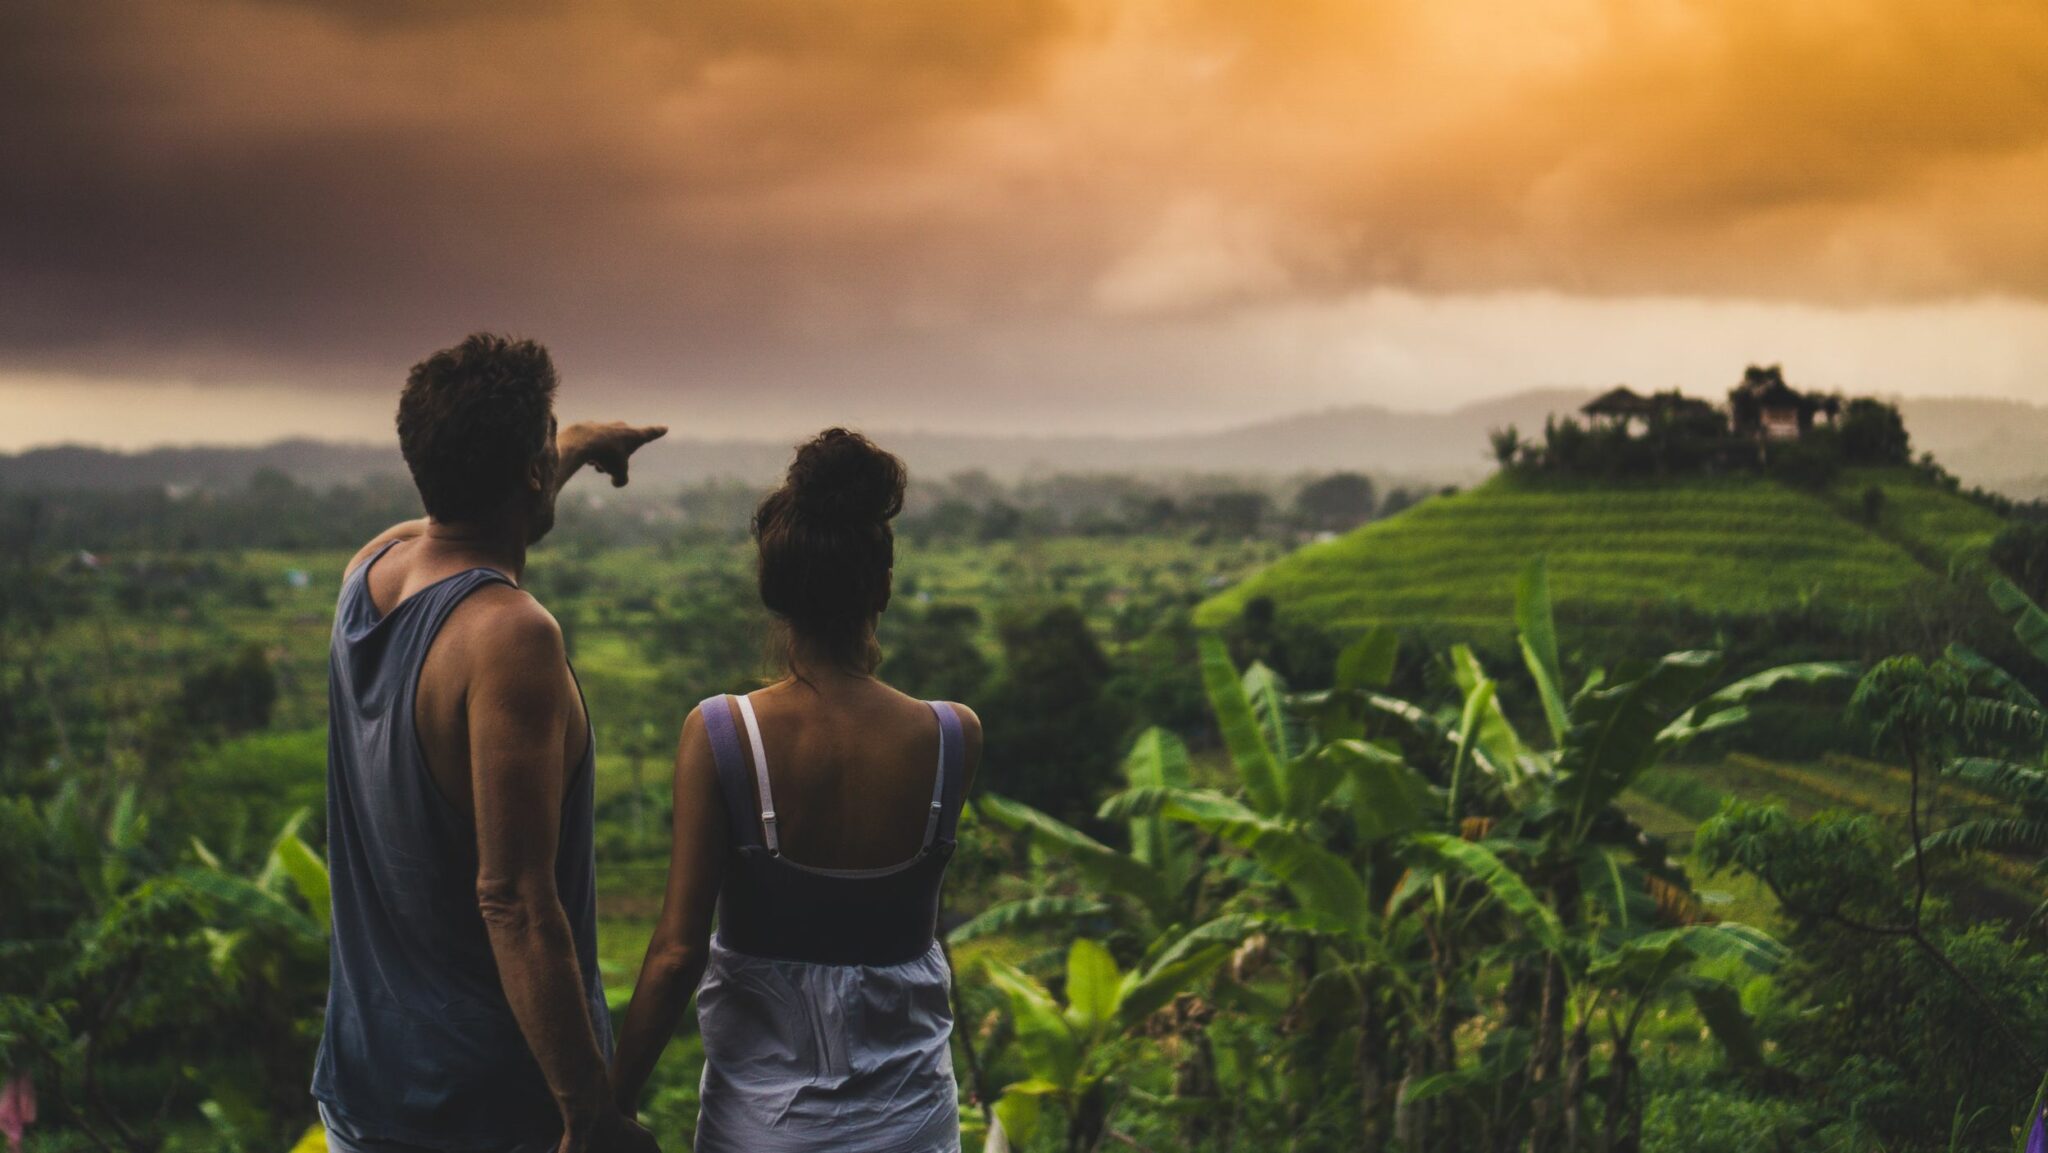 Bali For Couples – 5 Top Things To Do In Bali